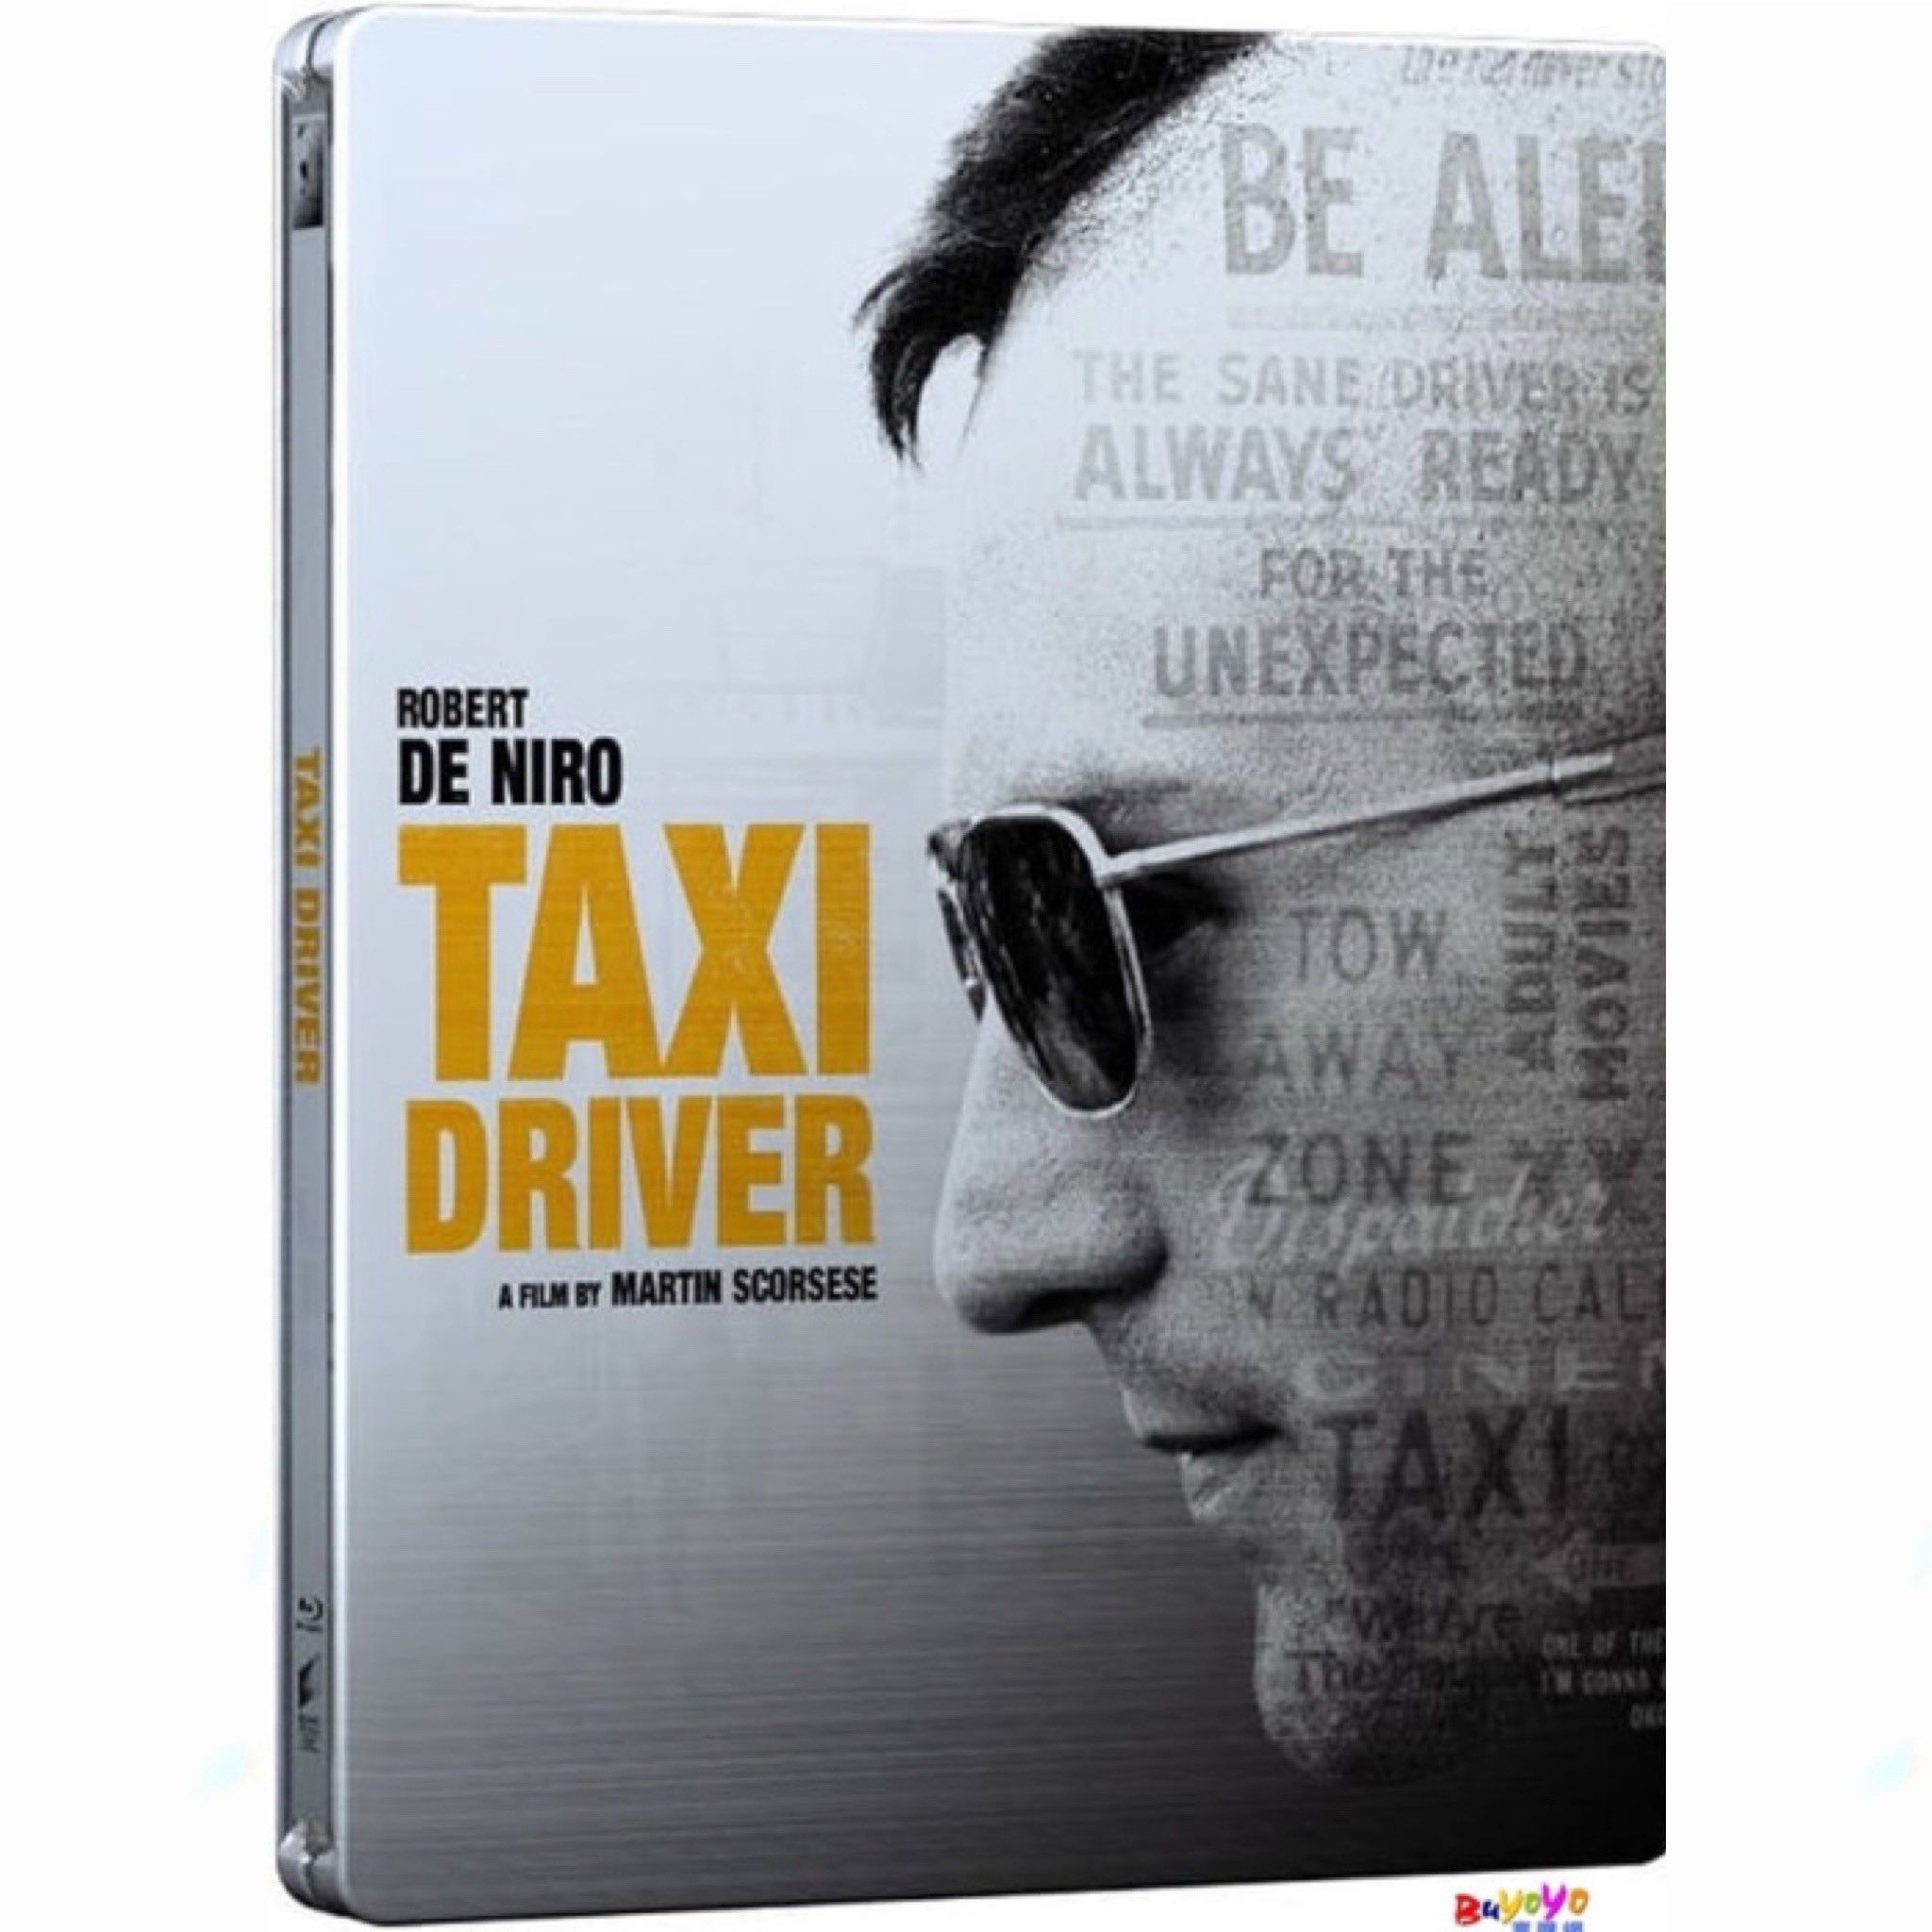 Dawn of The Discs on X: Coming to 4K UHD Steelbook in July! Taxi Driver  (1976) 4K UHD A mentally unstable veteran works as a nighttime taxi driver  in New York City